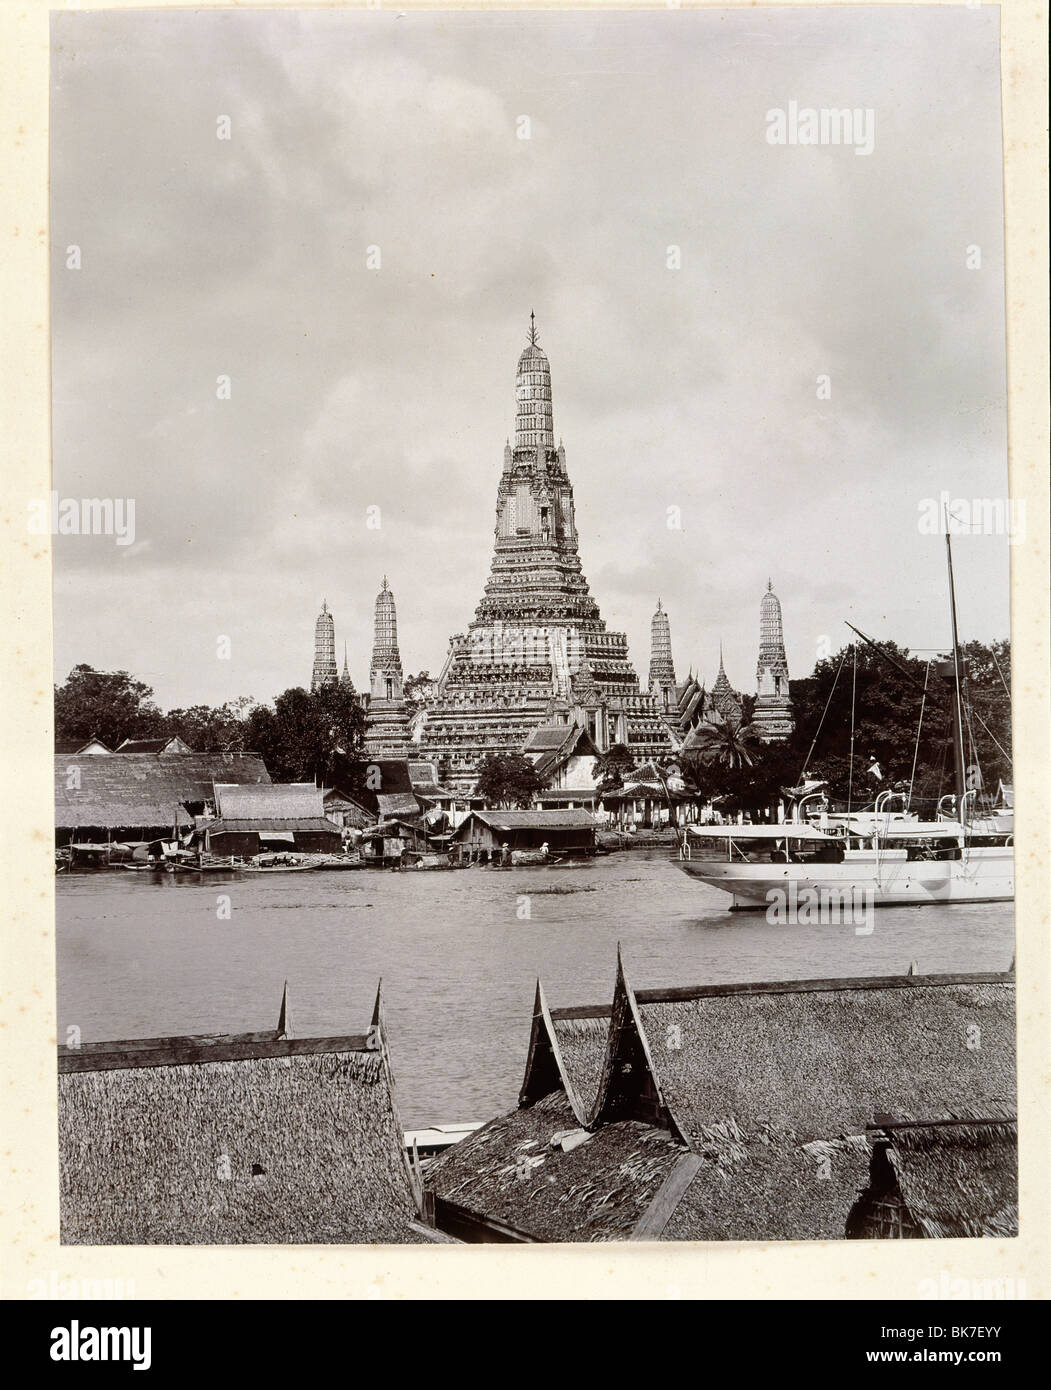 Old photo of Wat Arun with Chao Phraya River taken by Robert Lenz in 1890, Bangkok, Thailand, Southeast Asia, Asia Stock Photo